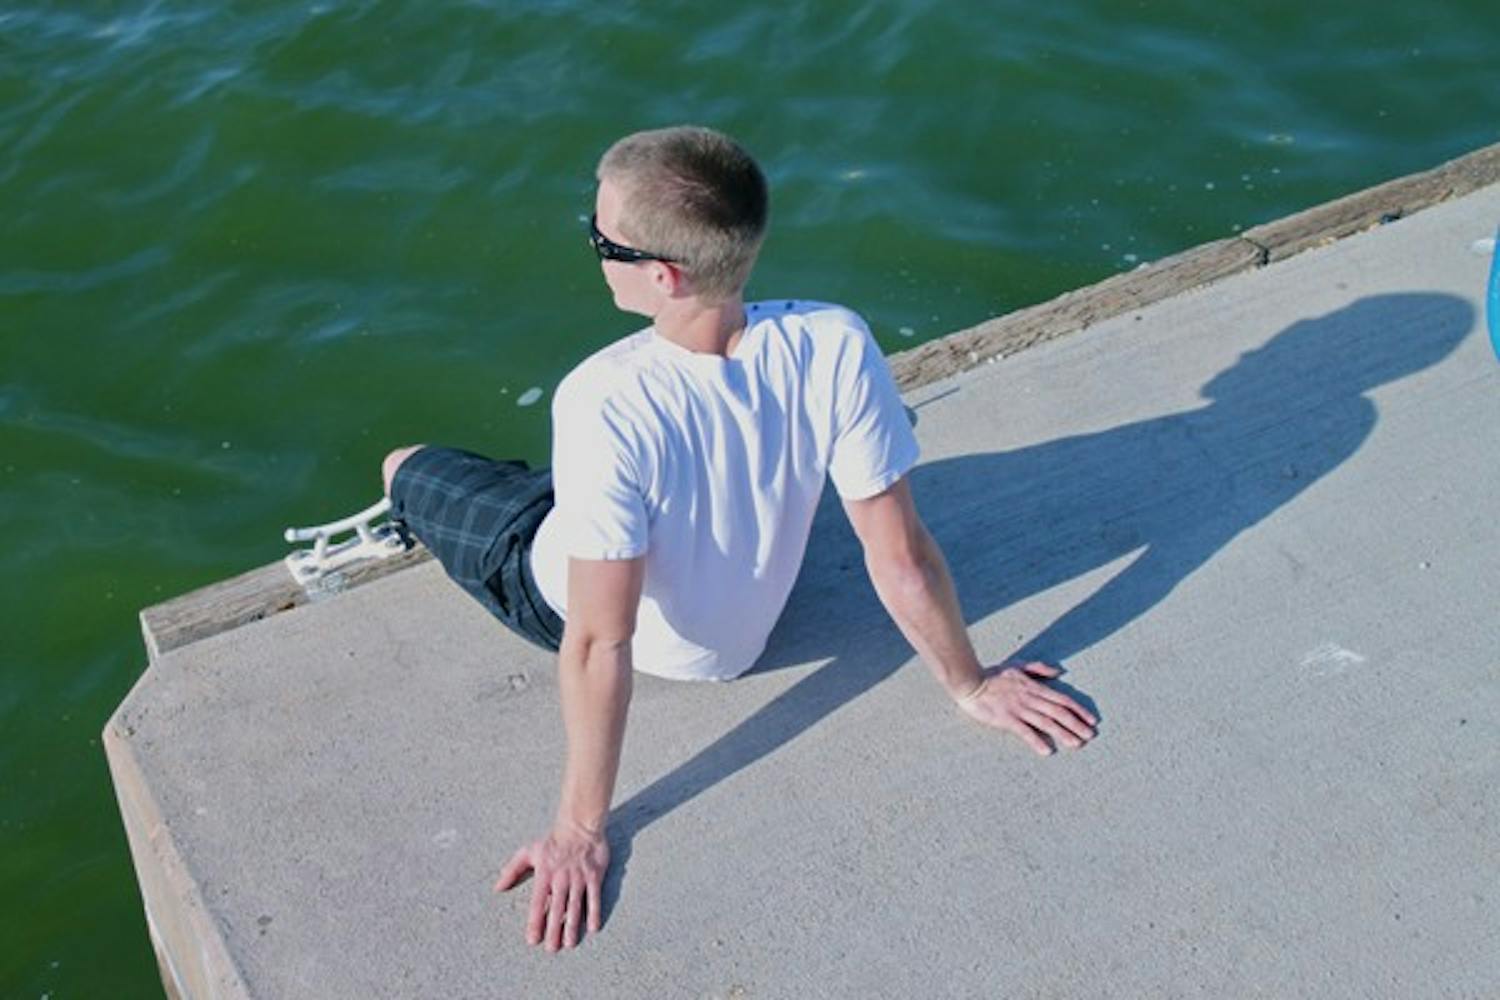 HANGING OUT: Kinesiology sophomore Matthew Cain passes the time by getting his feet wet while looking out over Tempe Town Lake after classes on Monday afternoon. (Photo by Rosie Gochnour)